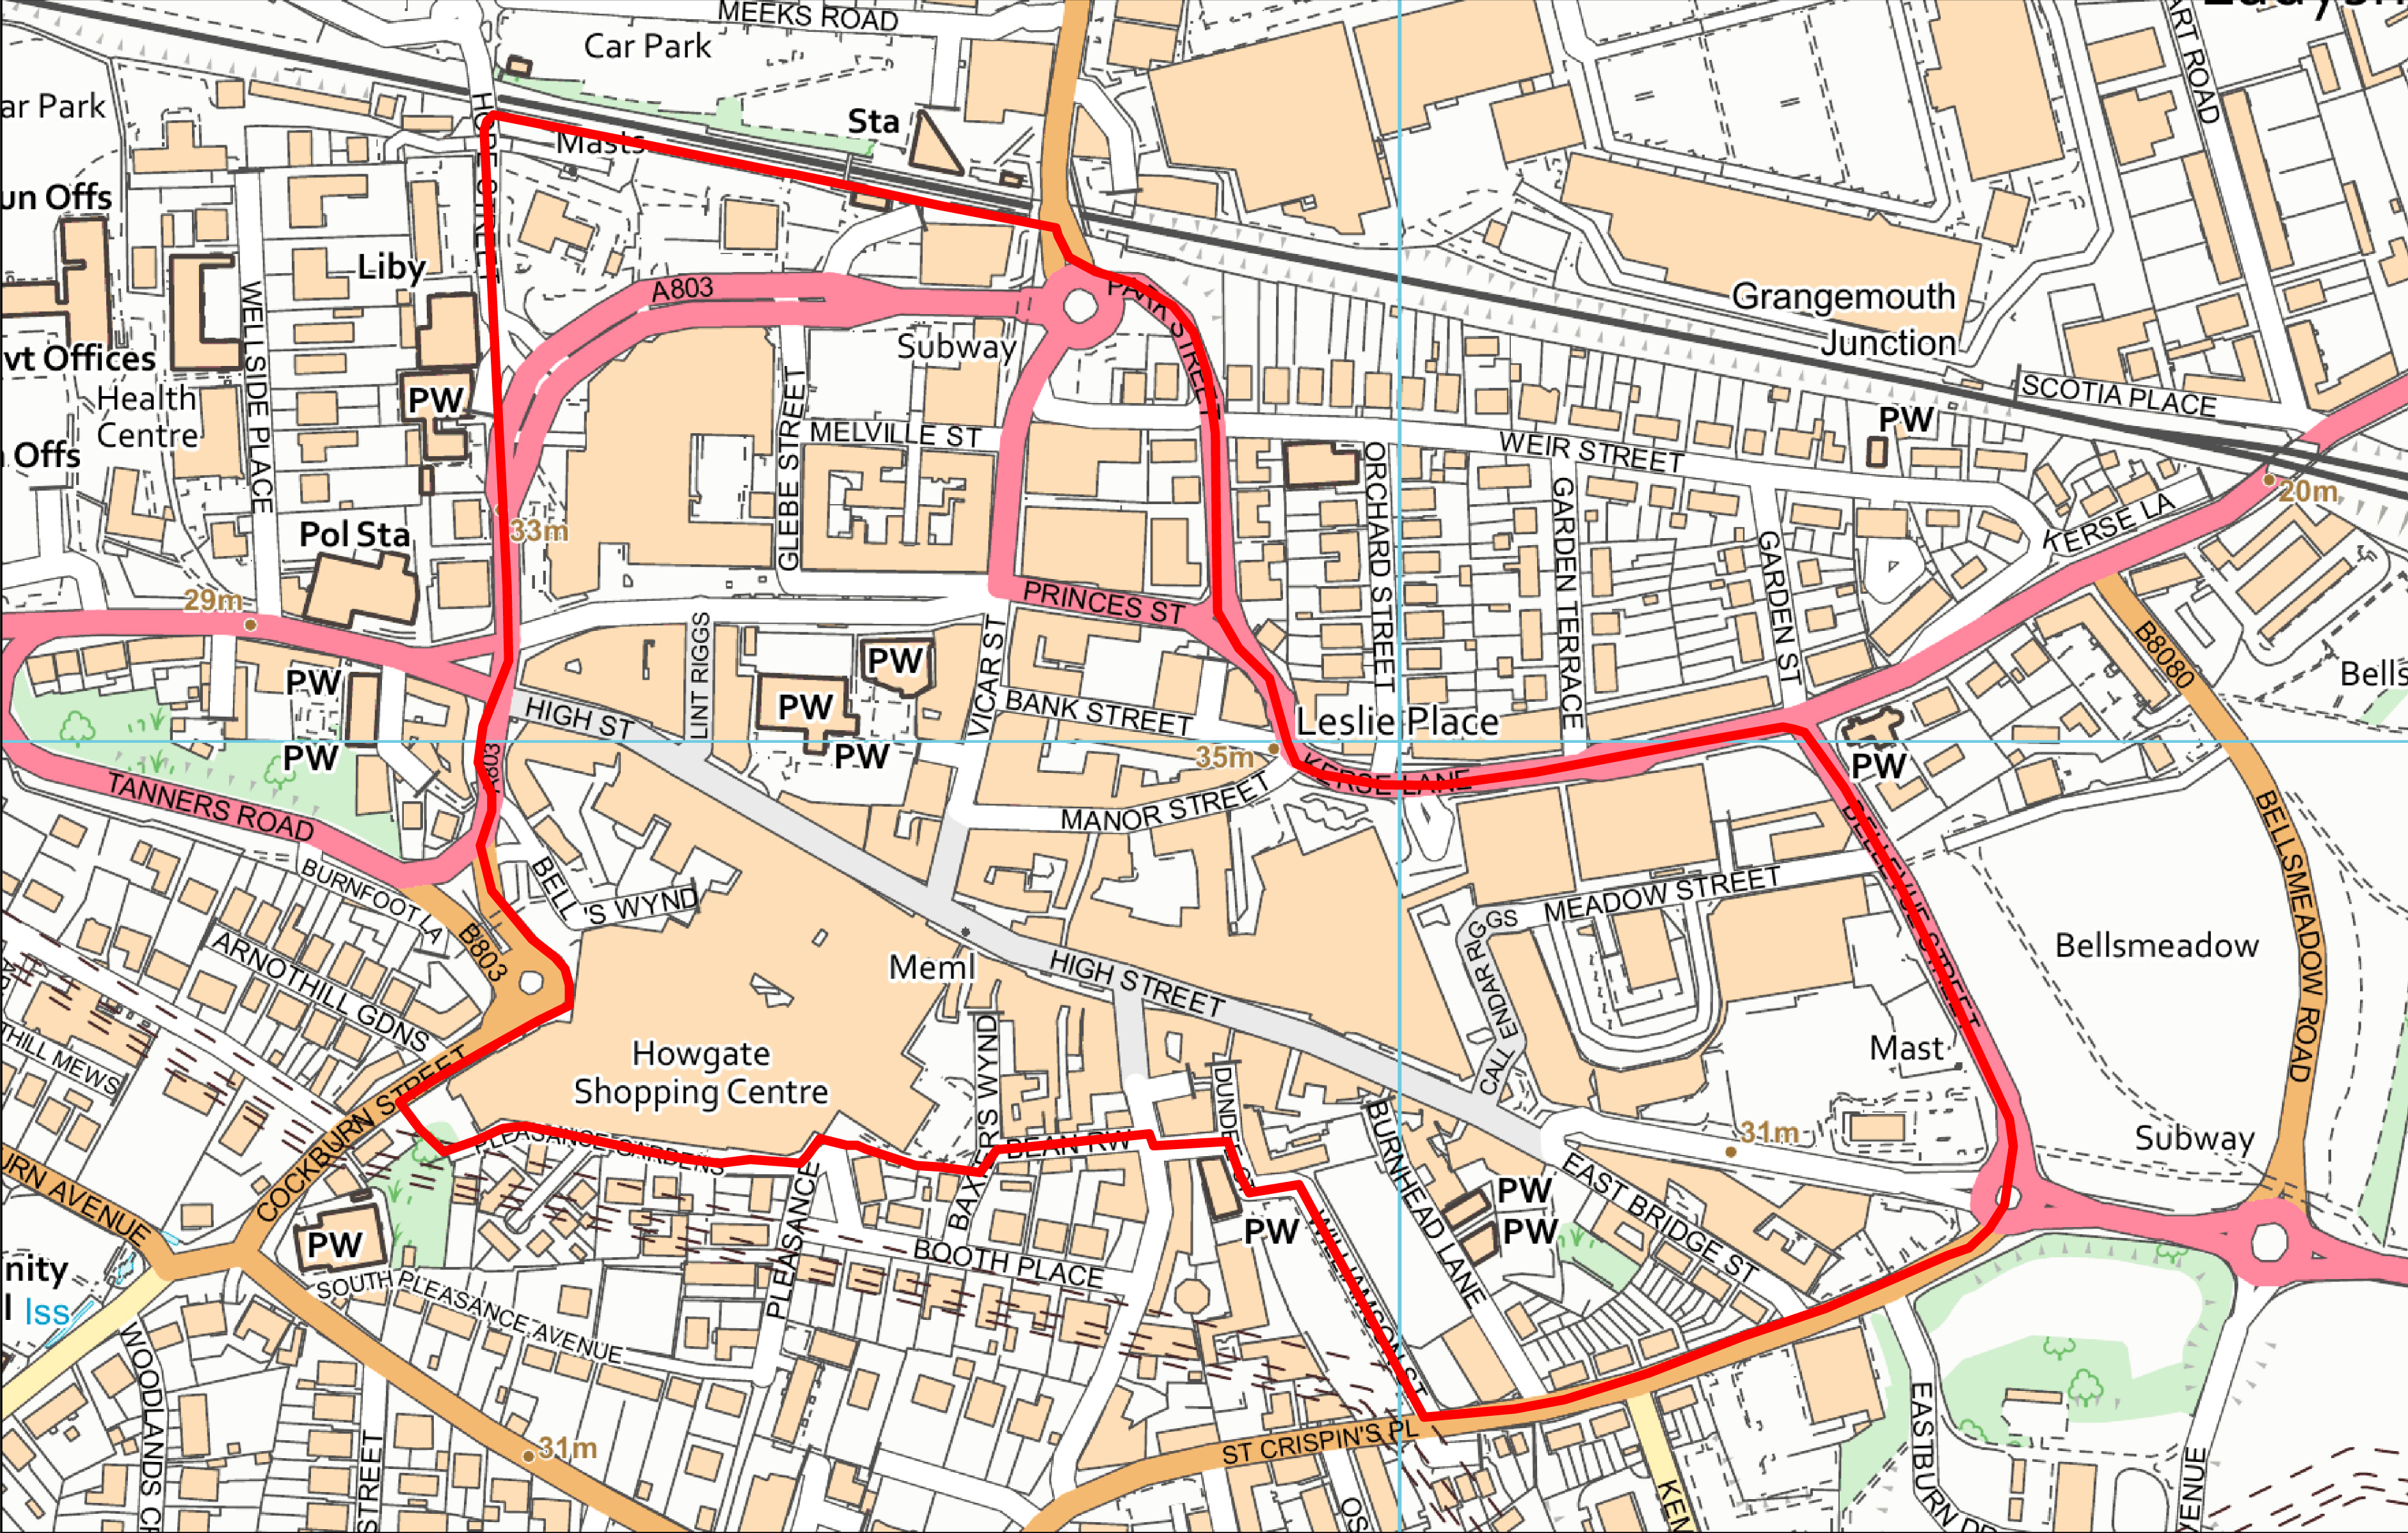 Falkirk Town Centre map showing site search area